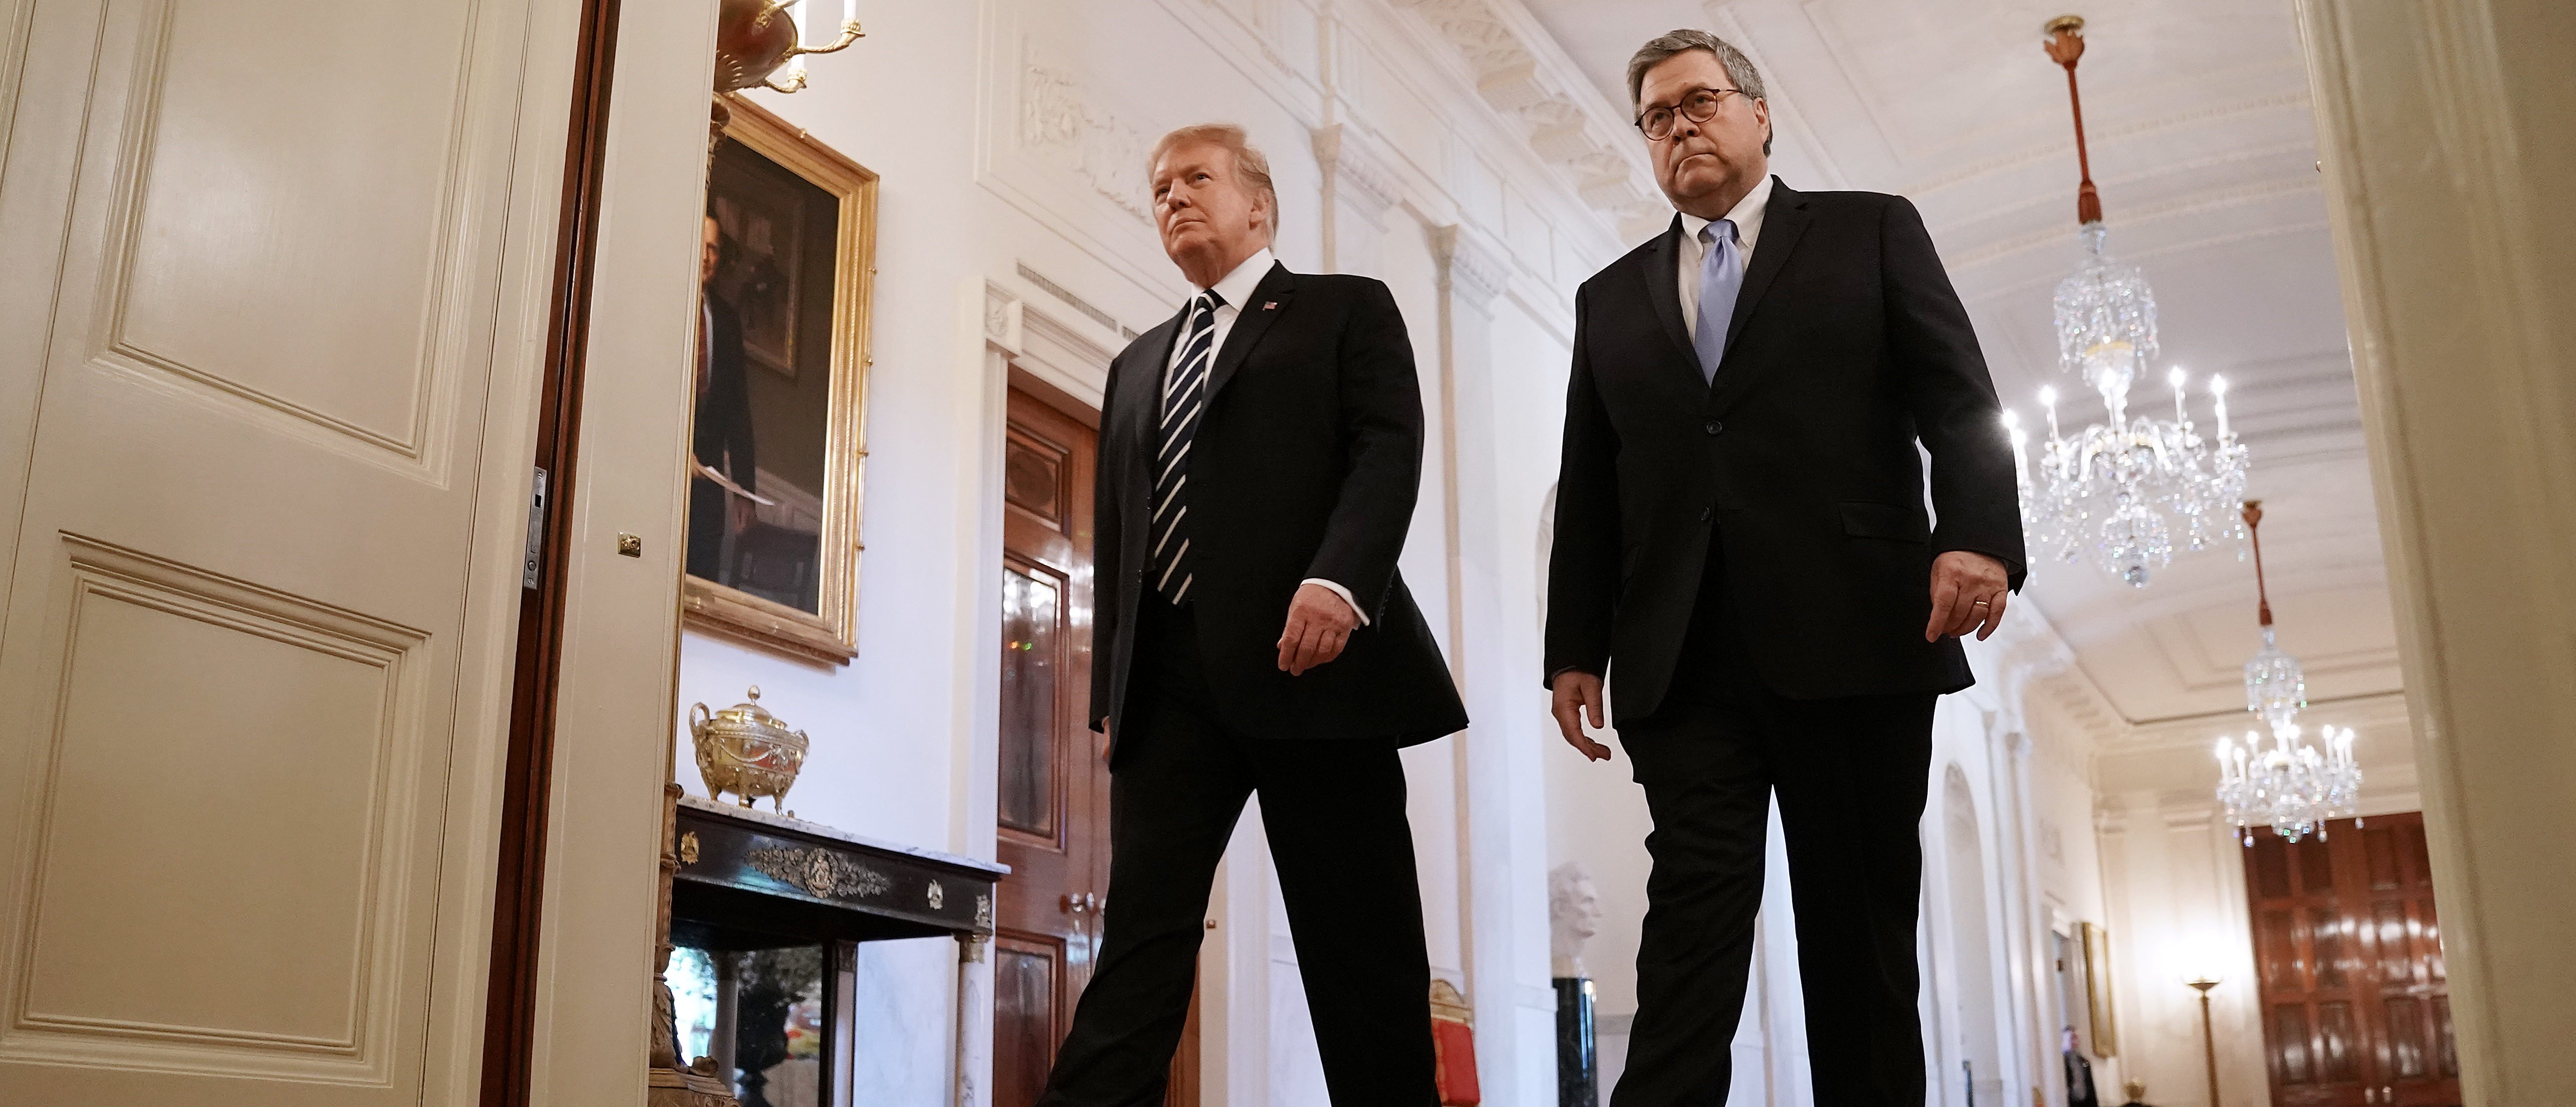 WASHINGTON, DC - MAY 22: U.S. President Donald Trump (L) and Attorney General William Barr arrive together for the presentation